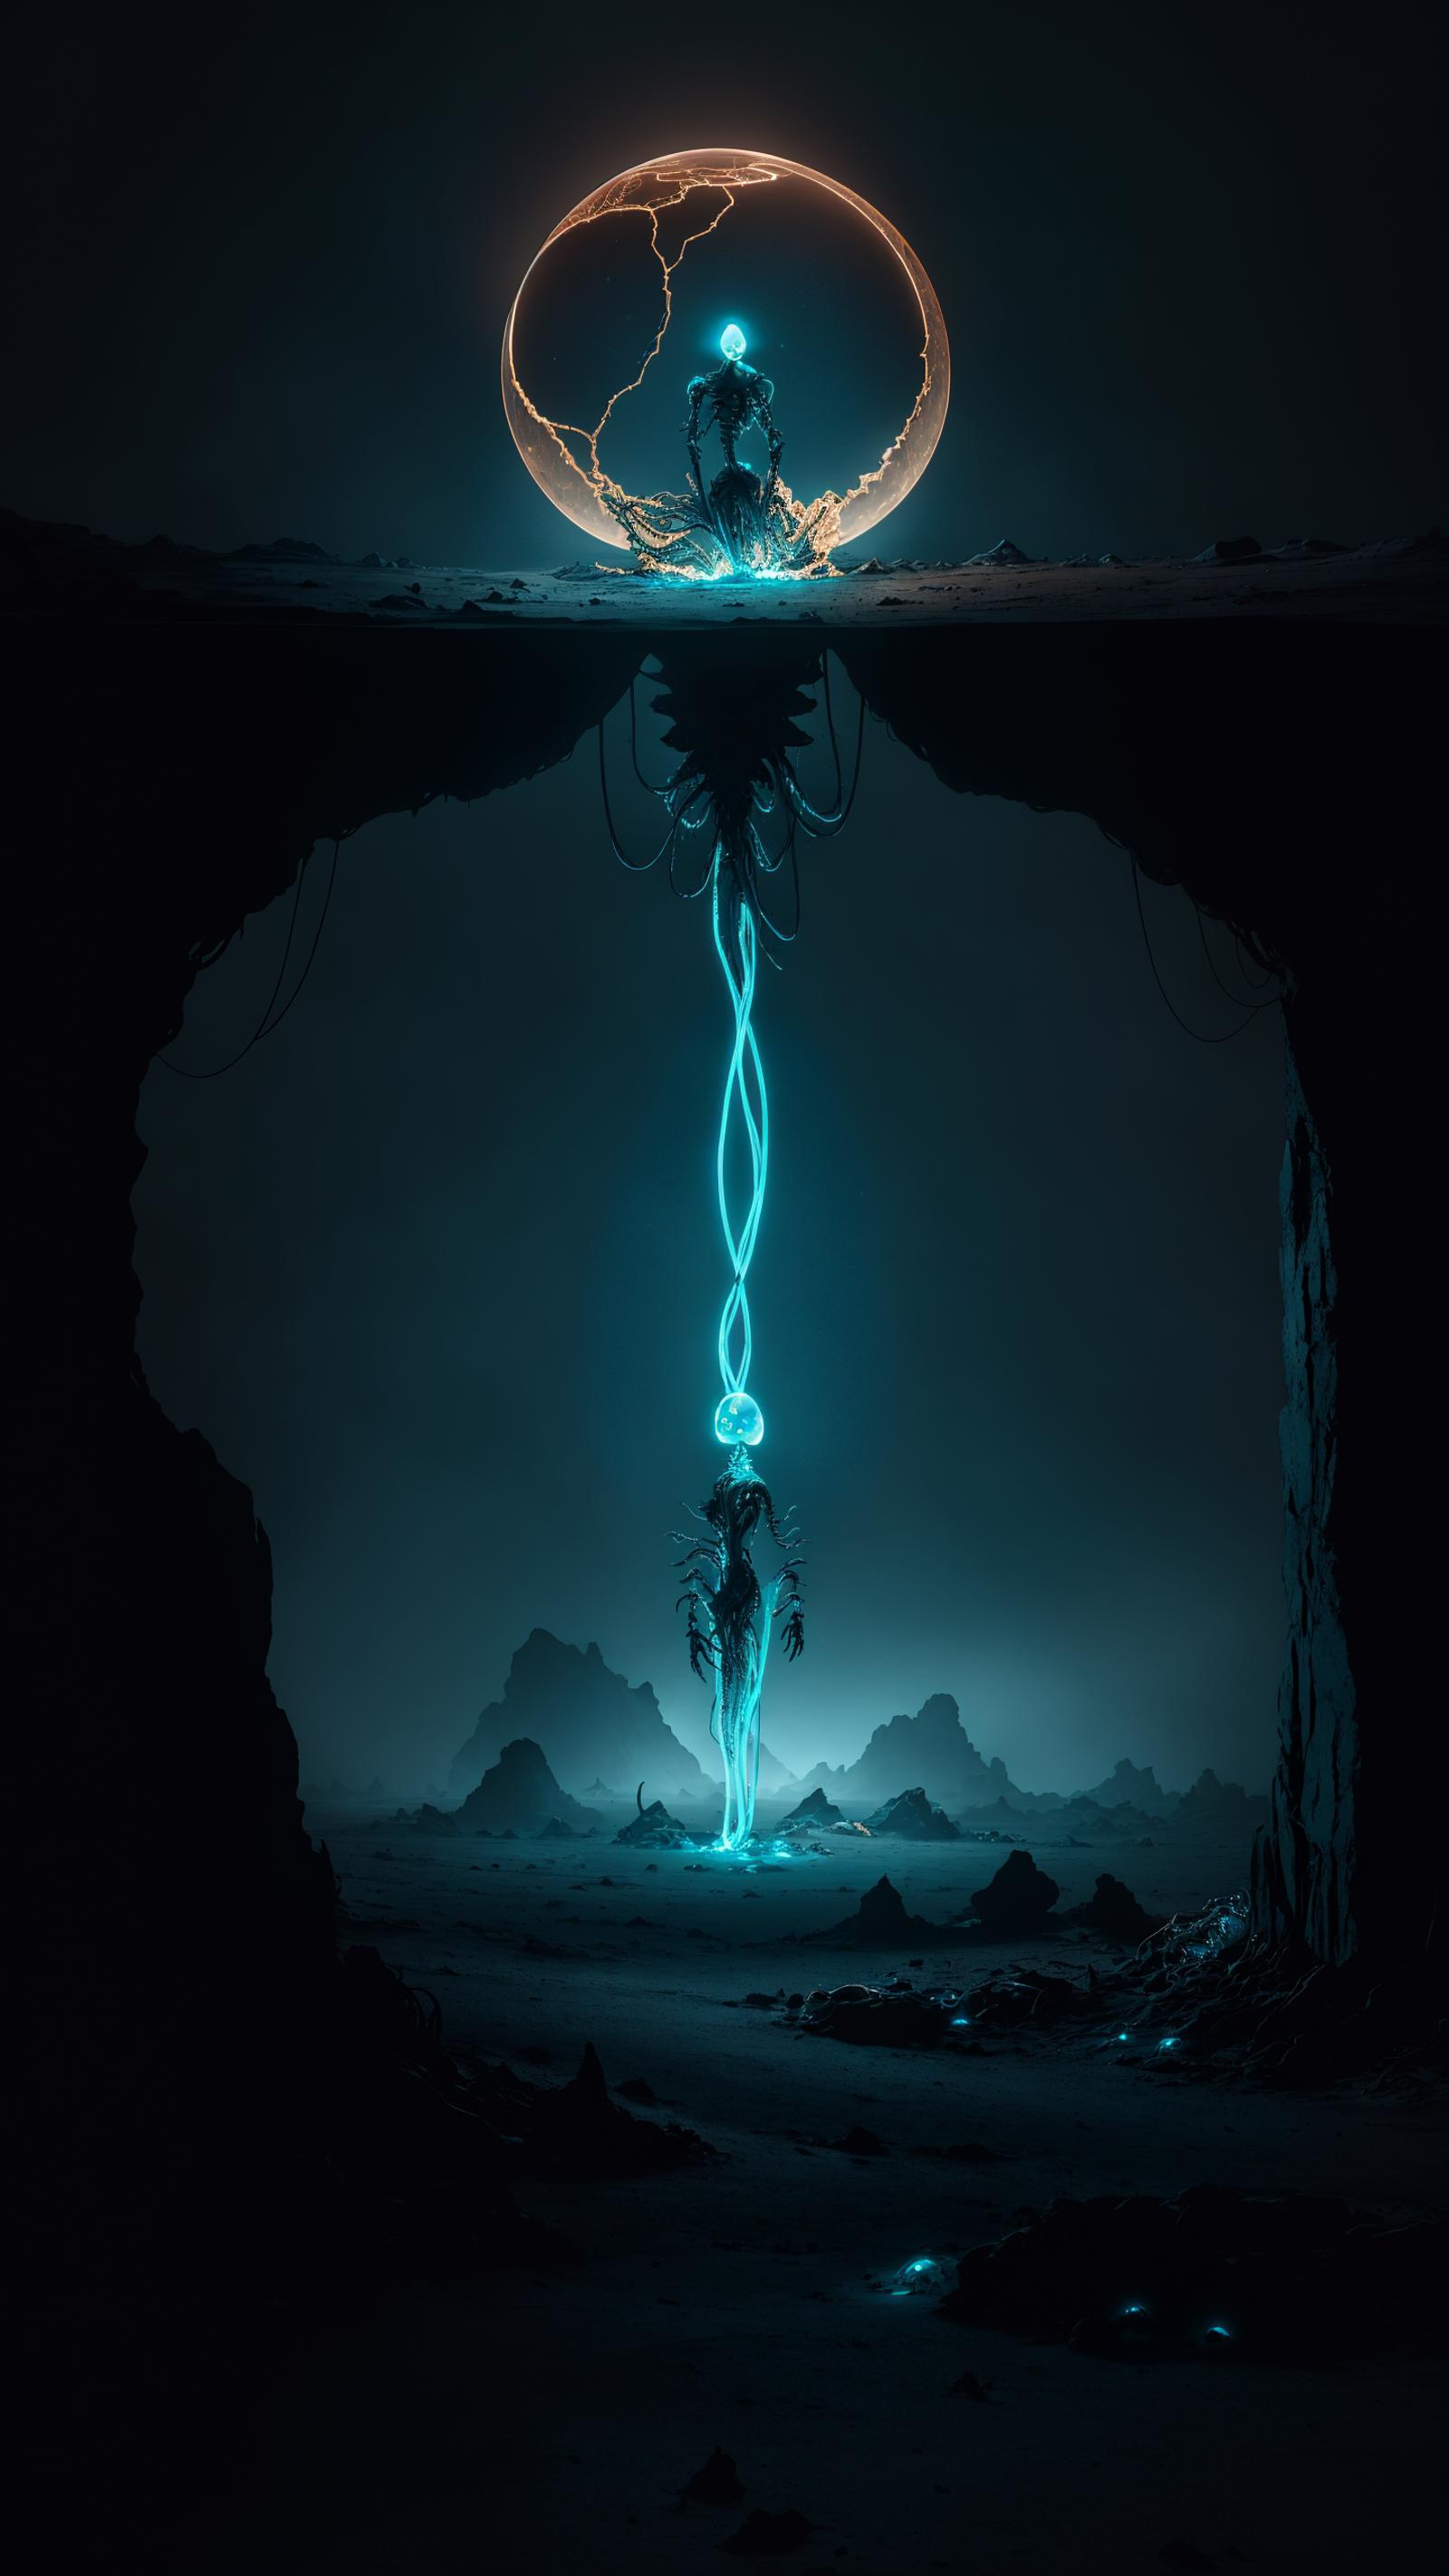 A dark, underground cavern with a blue light and a creature coming out of the ground.